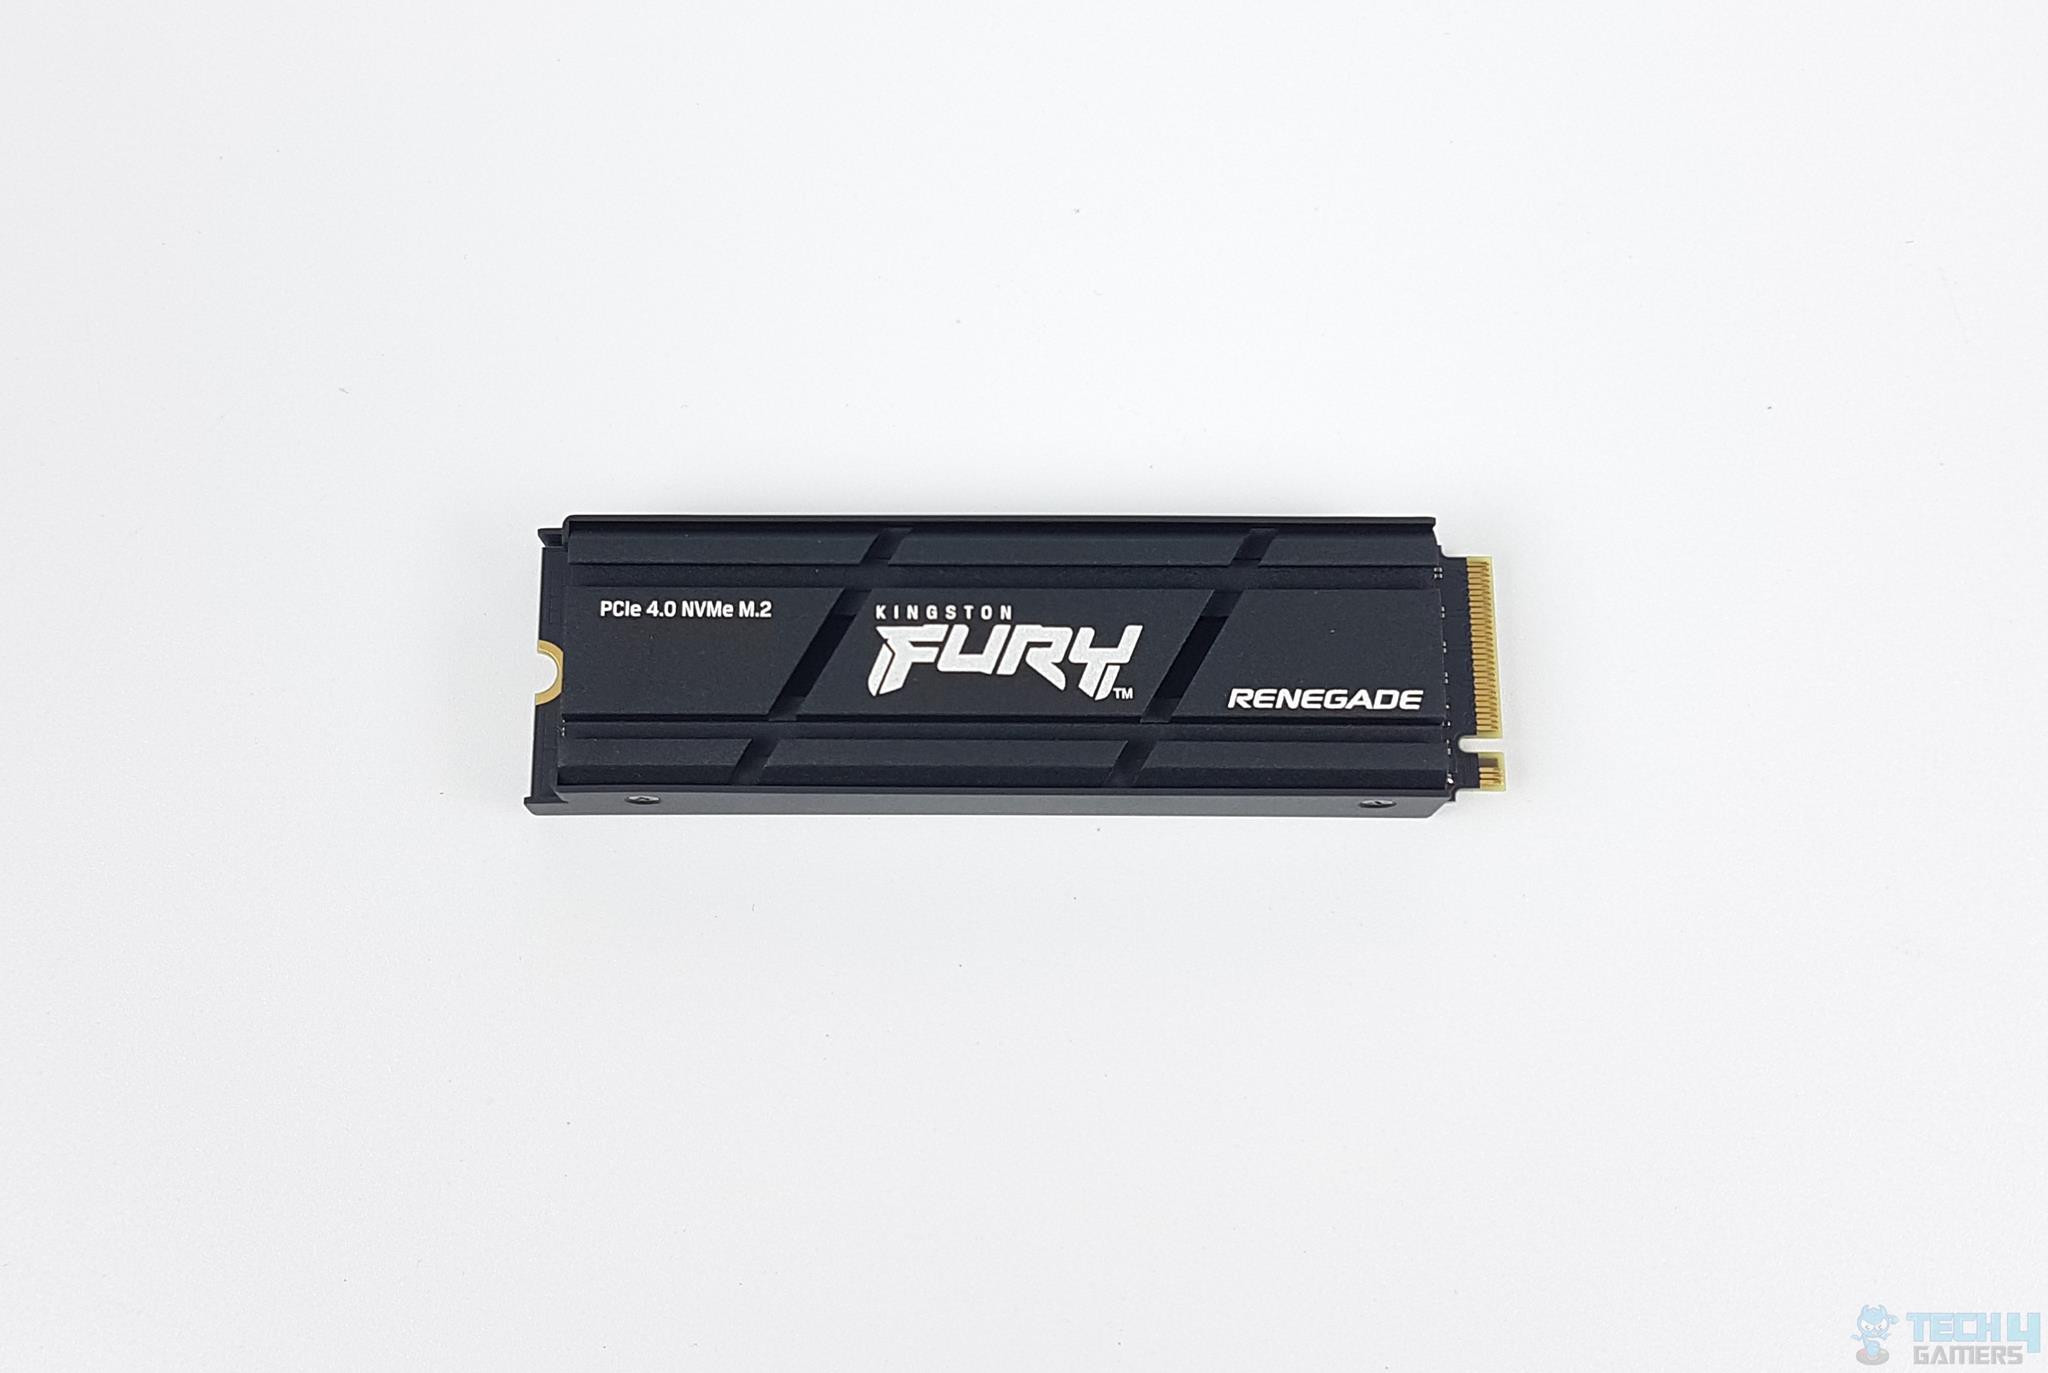 Kingston Fury Renegade 2TB NVMe SSD — The design of the SSD